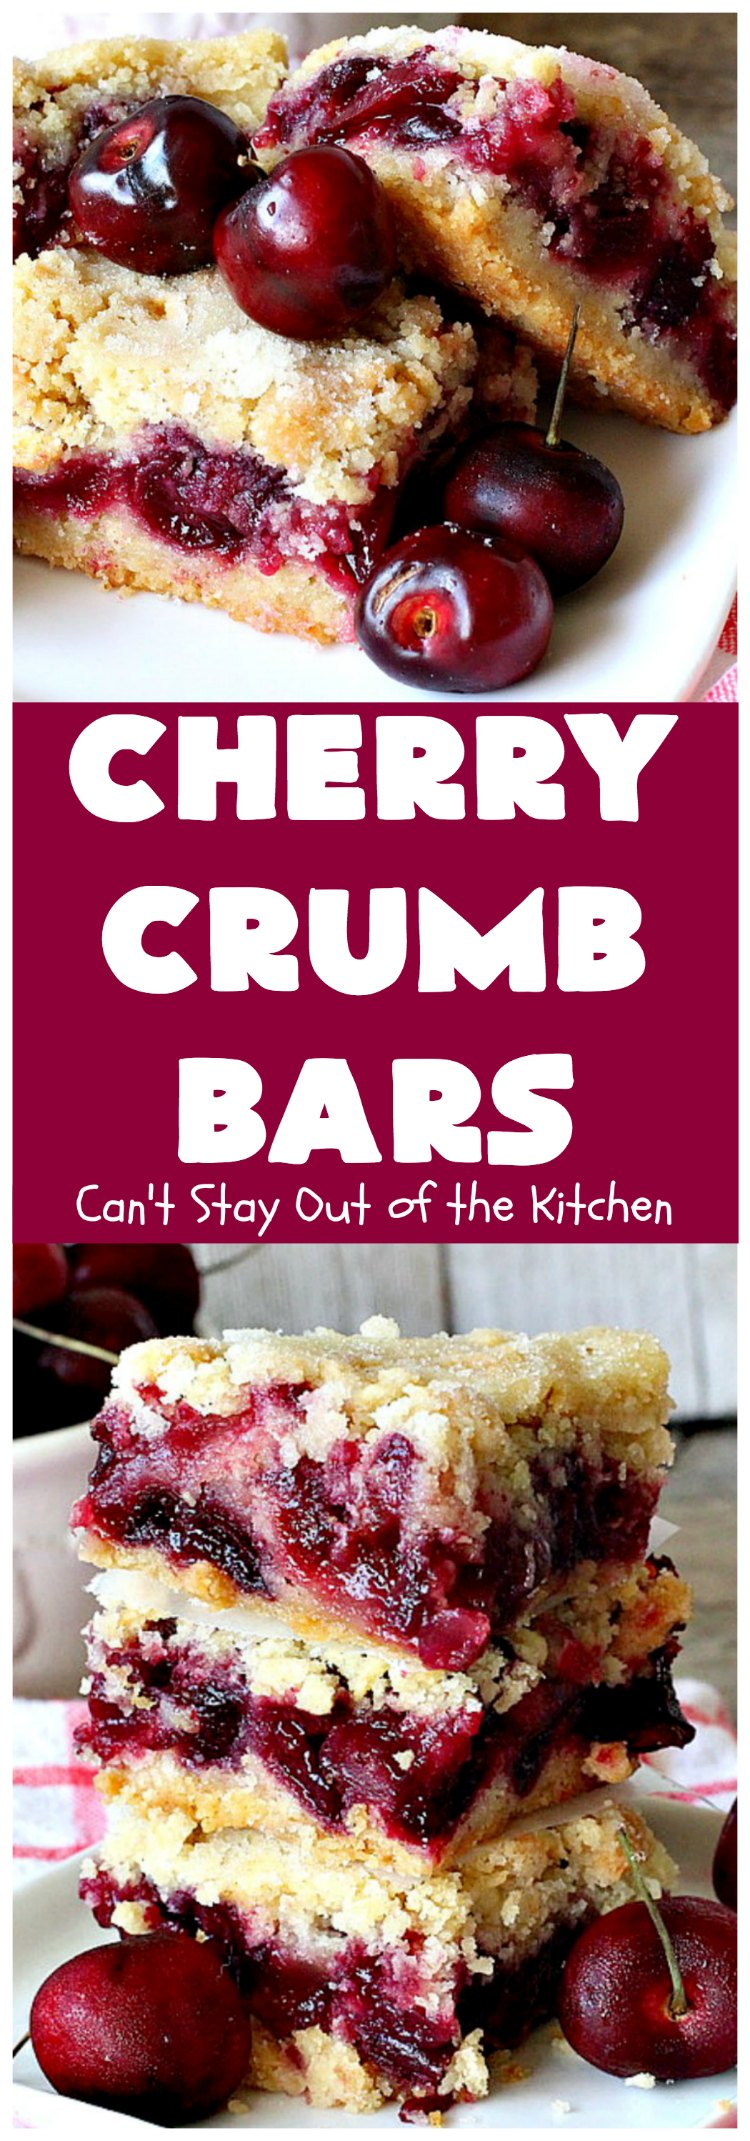 Cherry Crumb Bars | Can't Stay Out of the Kitchen